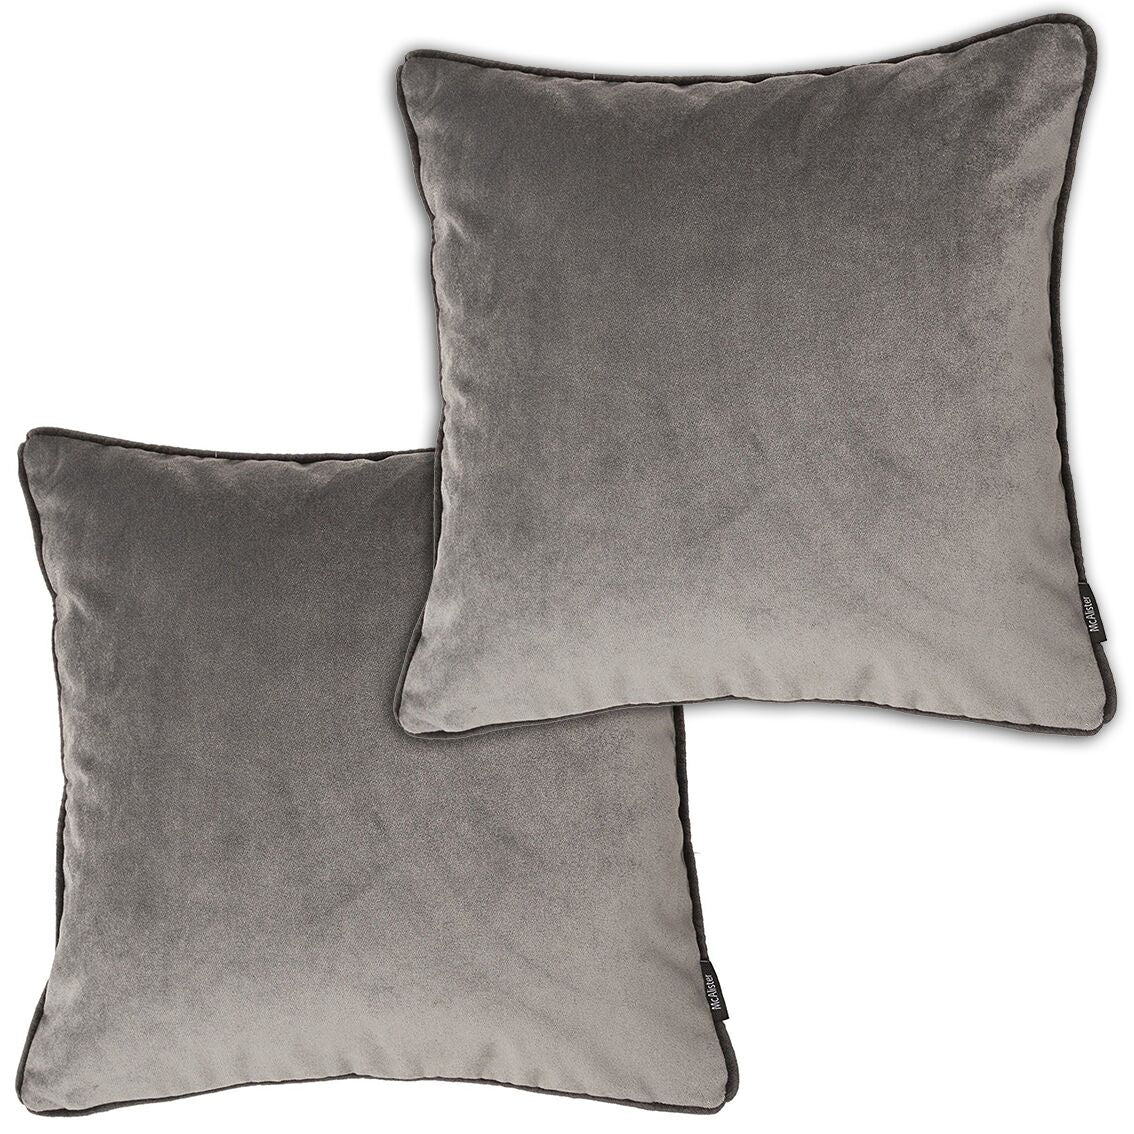 McAlister Textiles Matt Soft Silver Velvet 43cm x 43cm Piped Cushion Sets Cushions and Covers Cushion Covers Set of 2 